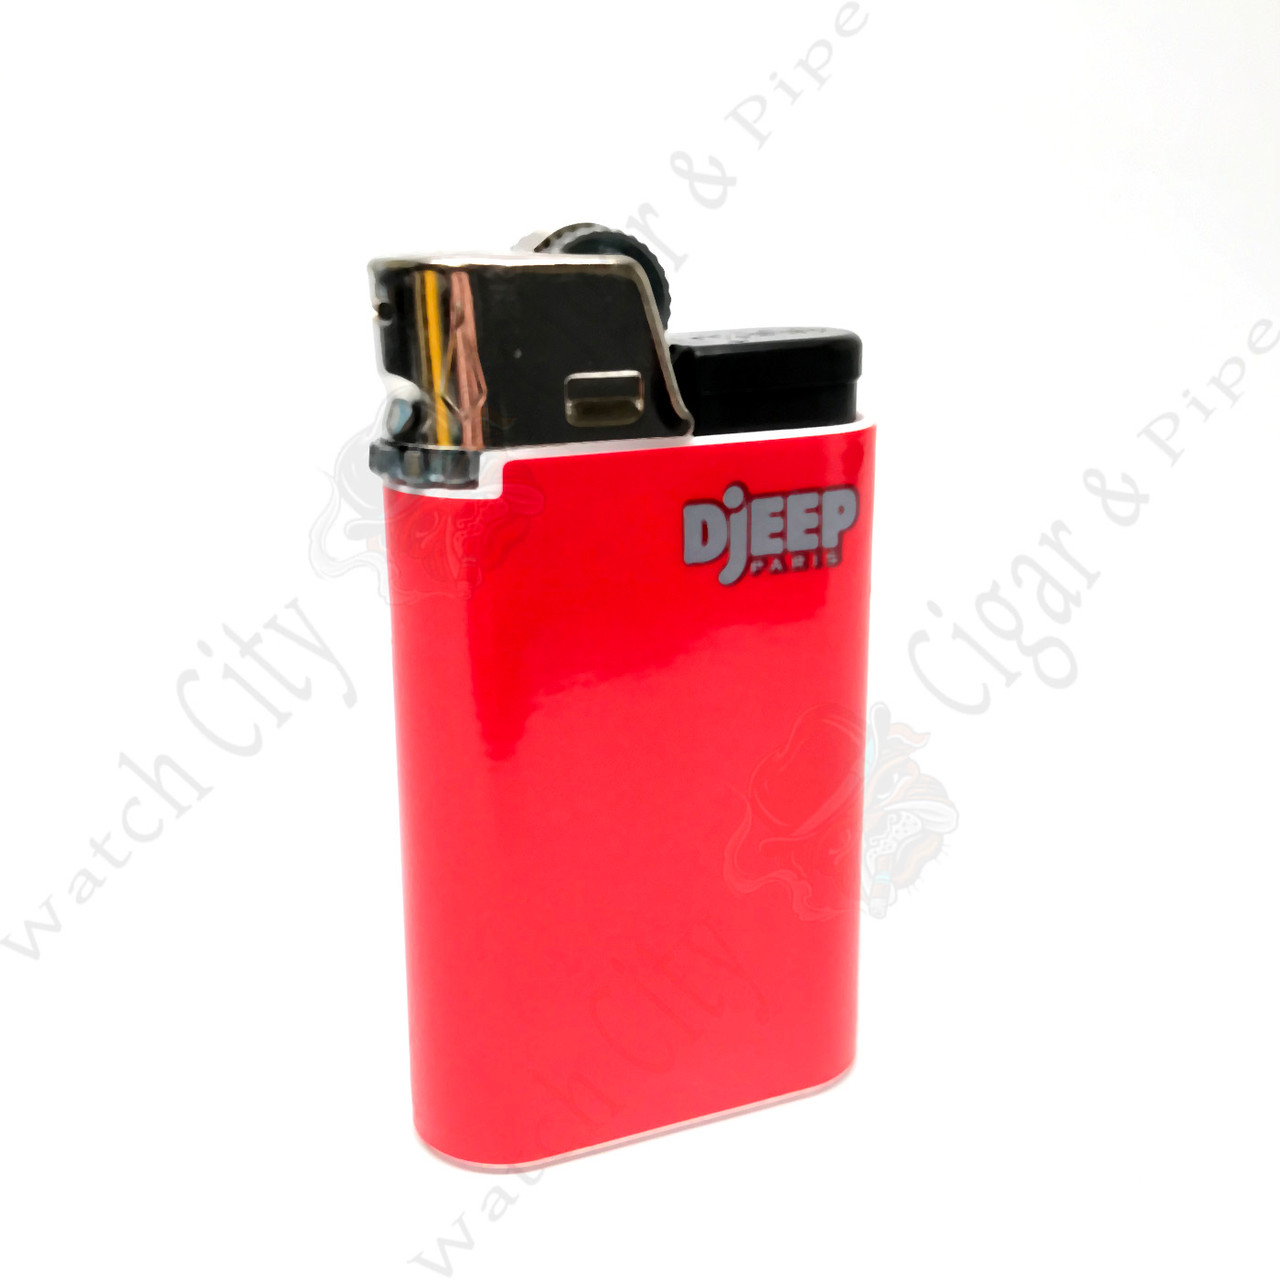 Retningslinier folder midtergang Djeep Lighter (No Shipping. Local Pickup Orders Only) - Watch City Cigar &  Pipe